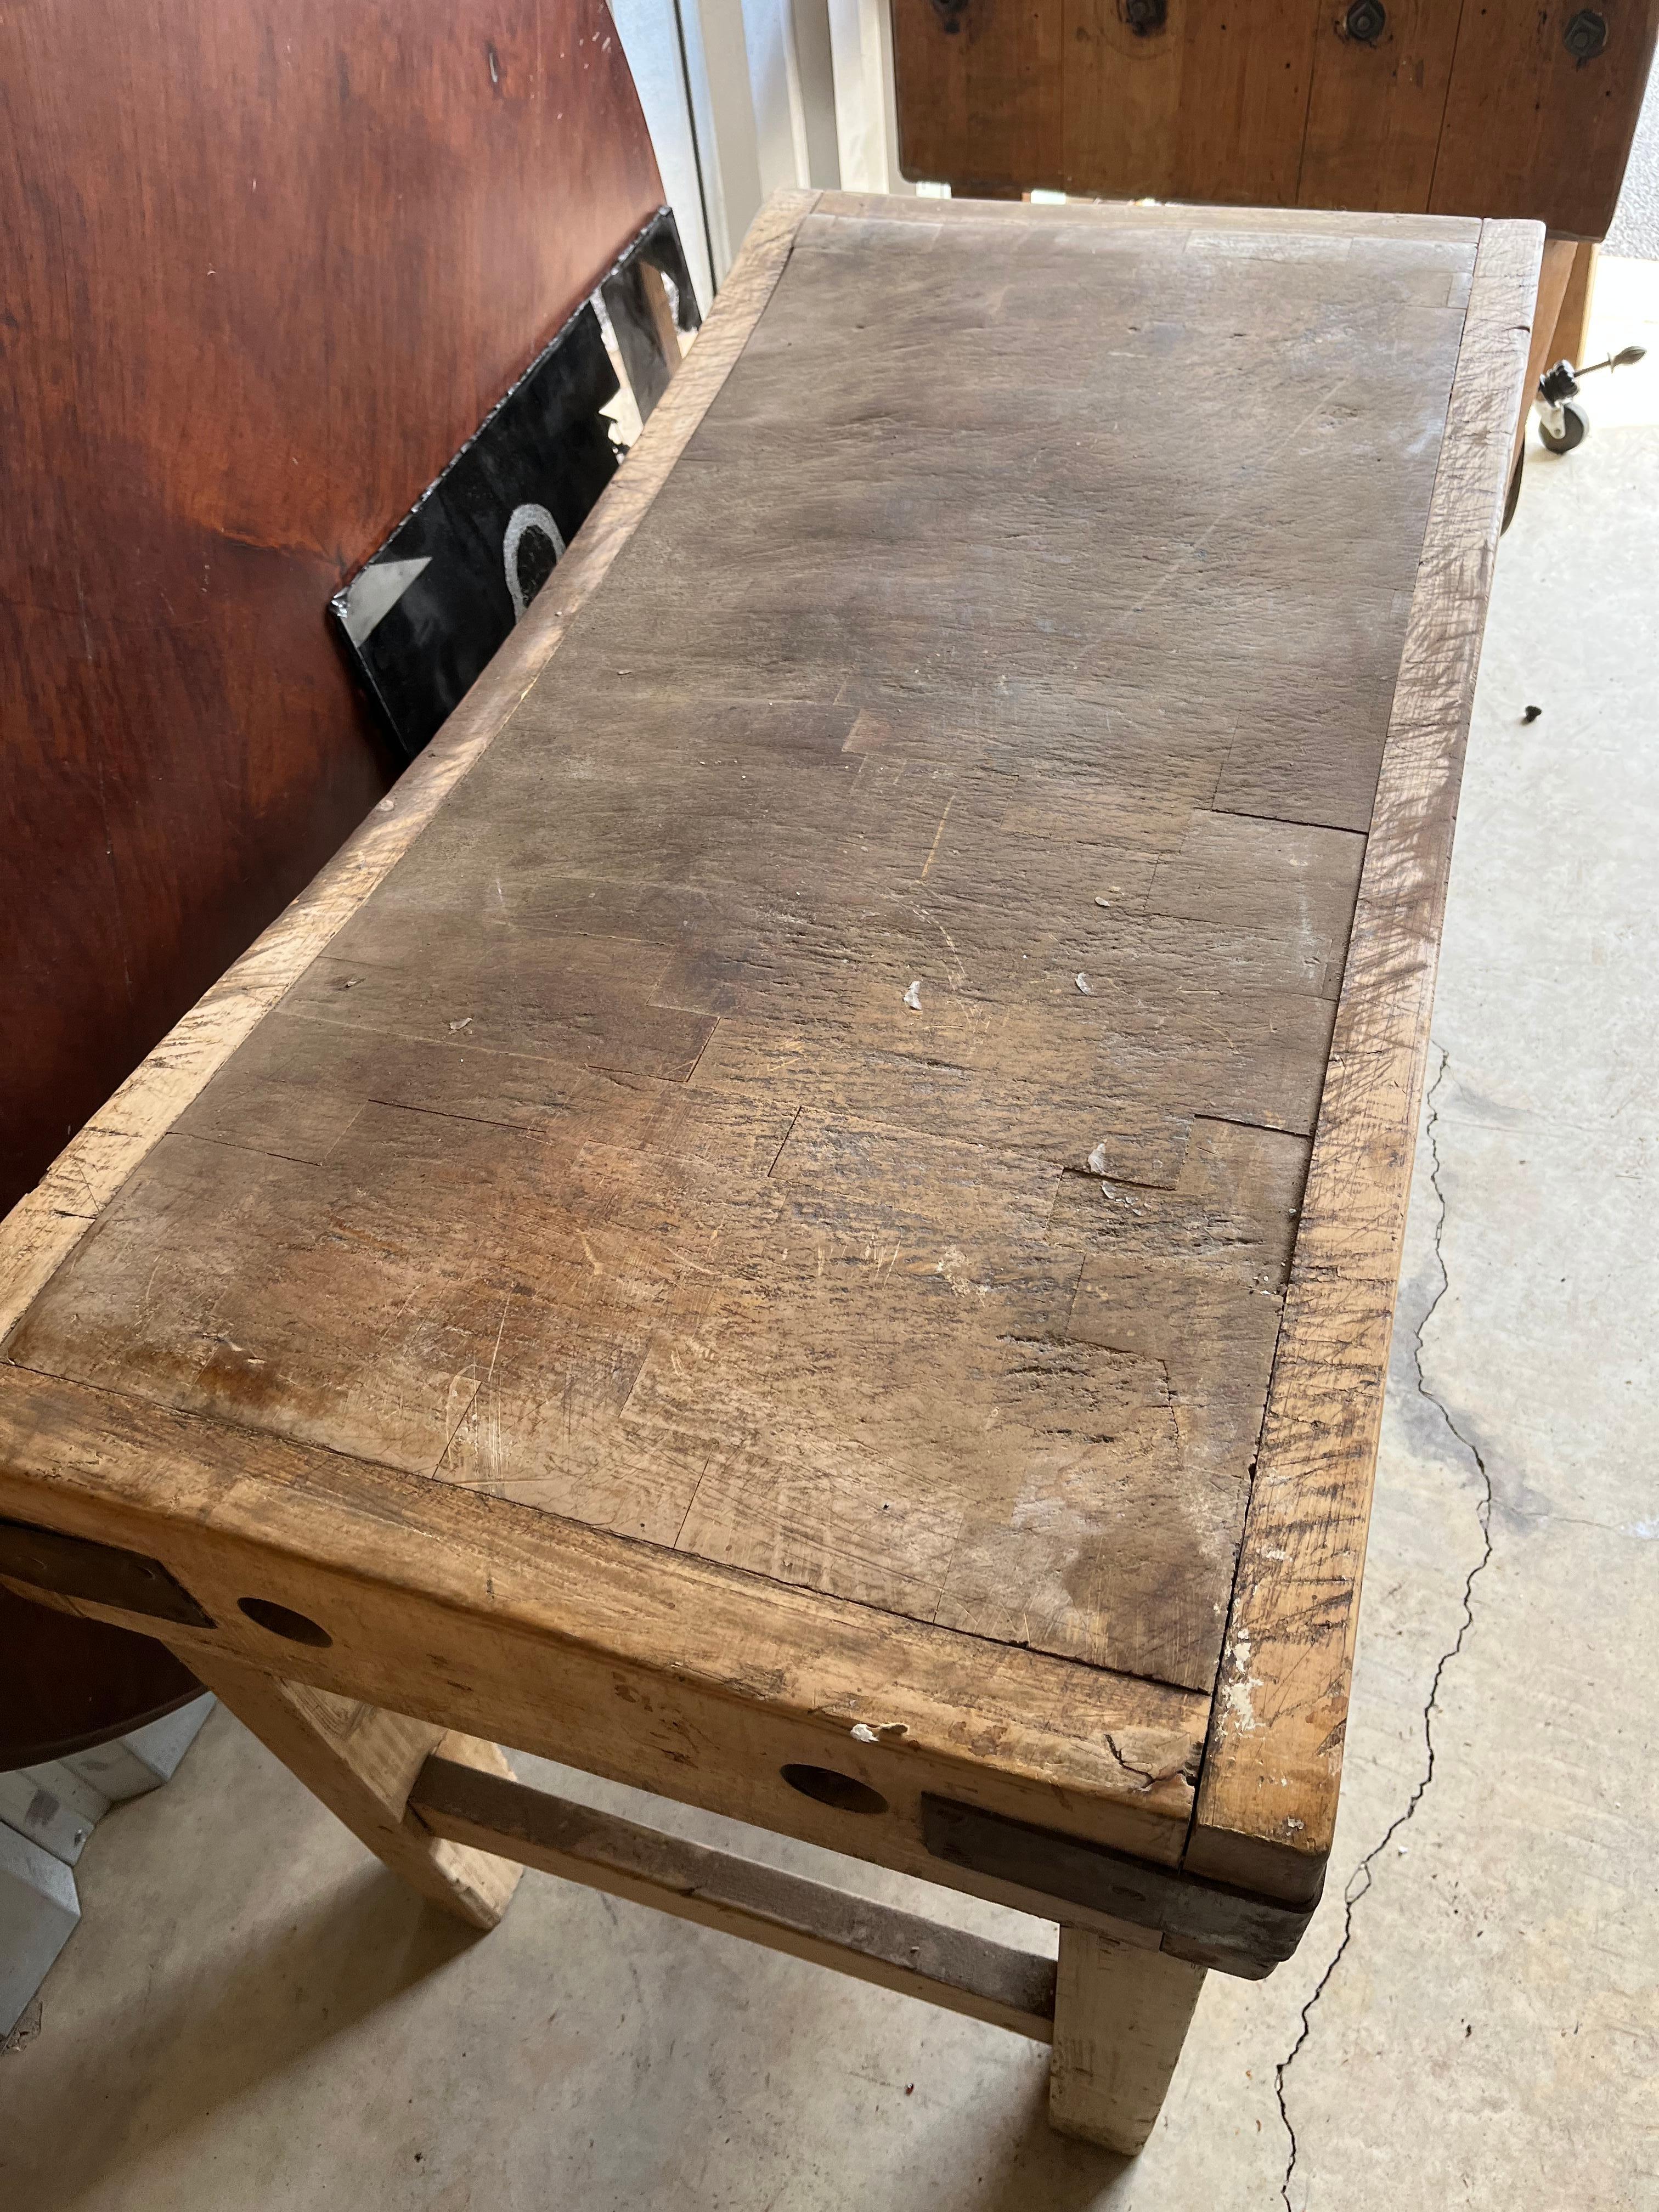 An early 20th century butcher’s block table with reversible top, well worn, with plenty of life still left in it. A great center island in a chef’s kitchen.